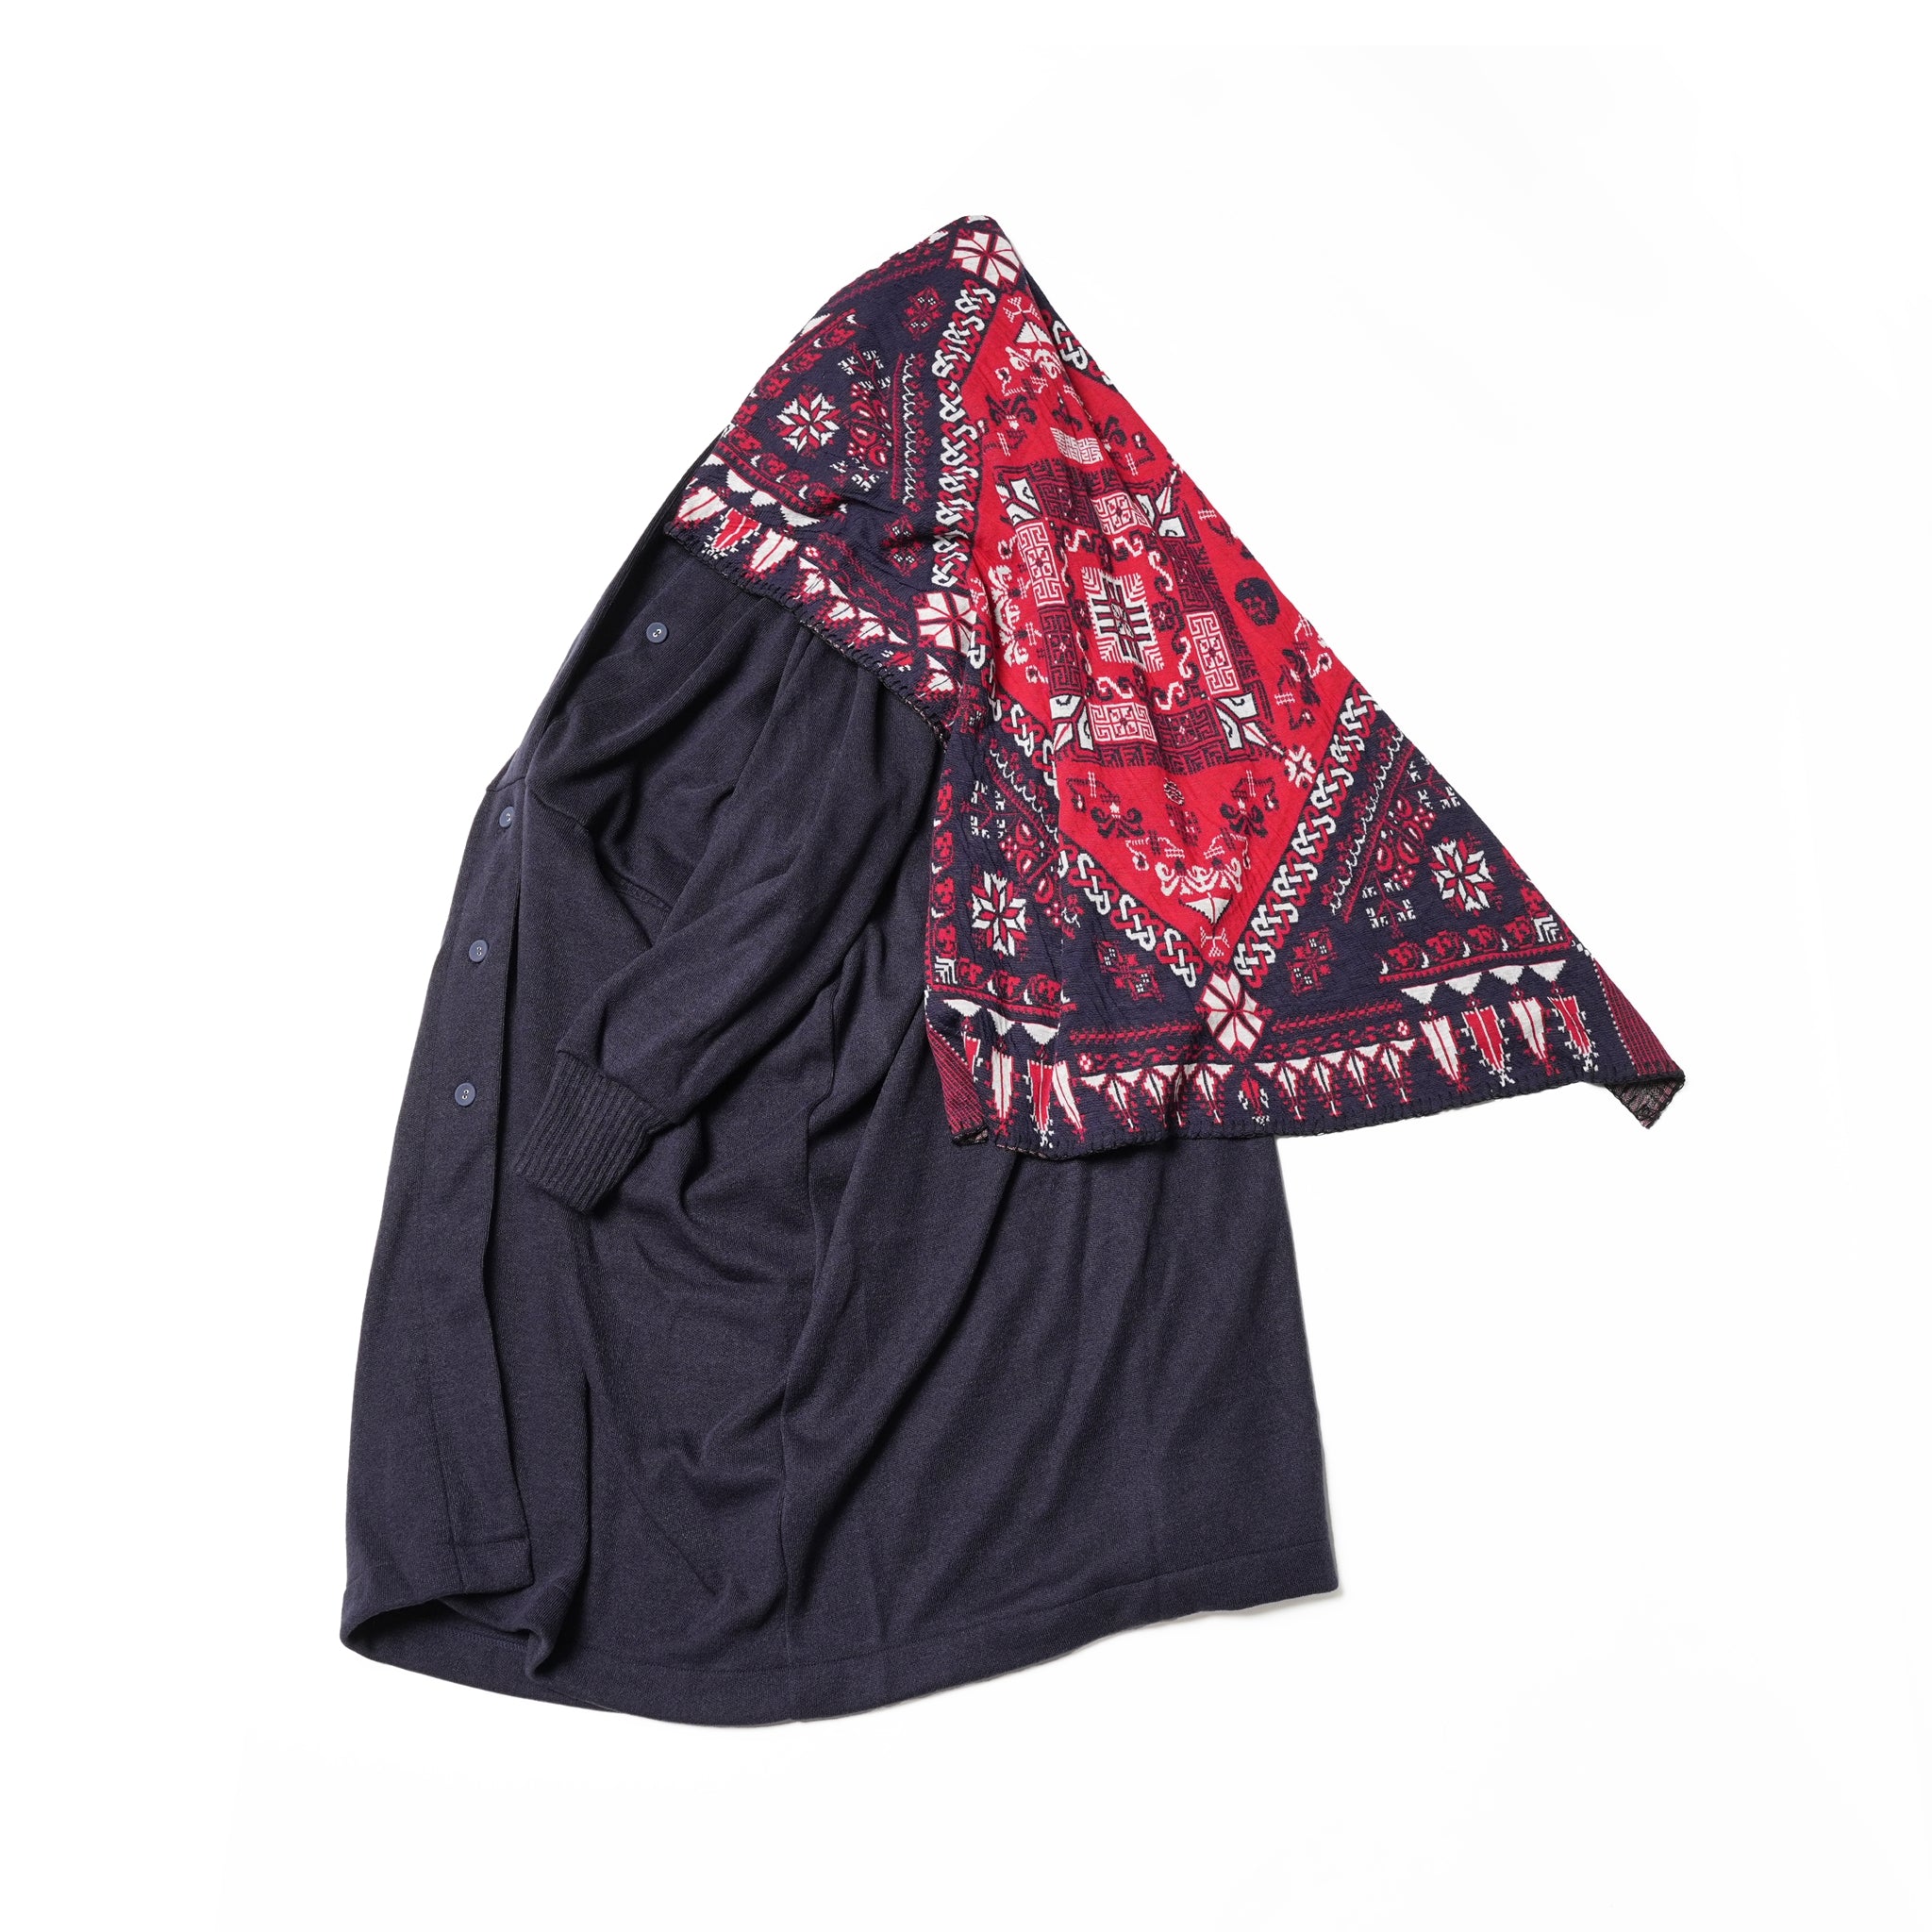 No:SF23AW-21 | Name:Scarf Gawn Cardigan | Color:Navy【STOF_ストフ】